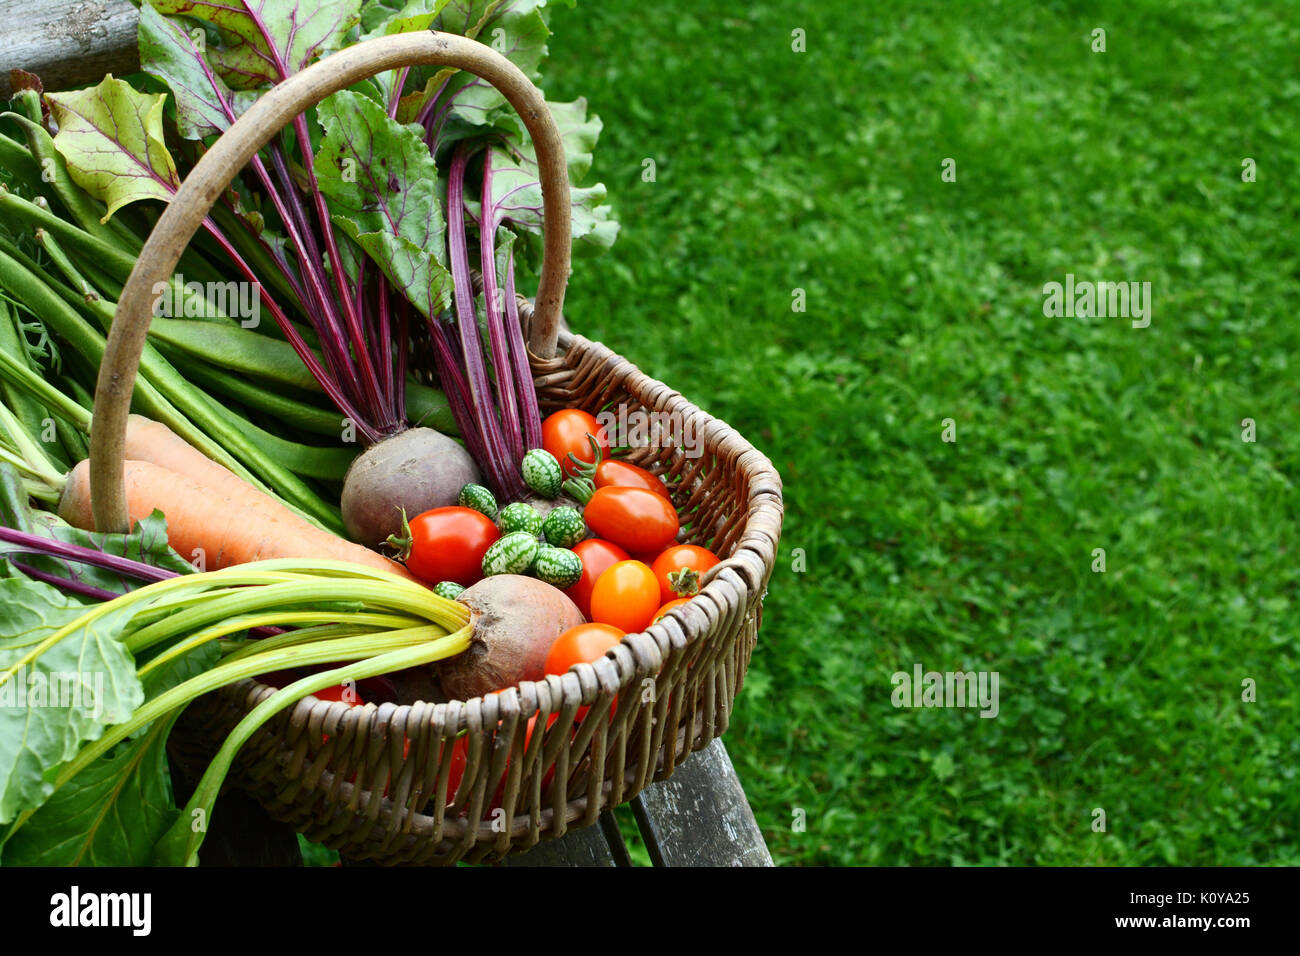 Woven basket filled with freshly harvested vegetables from an allotment sits on a wooden garden bench; copy space on grass Stock Photo